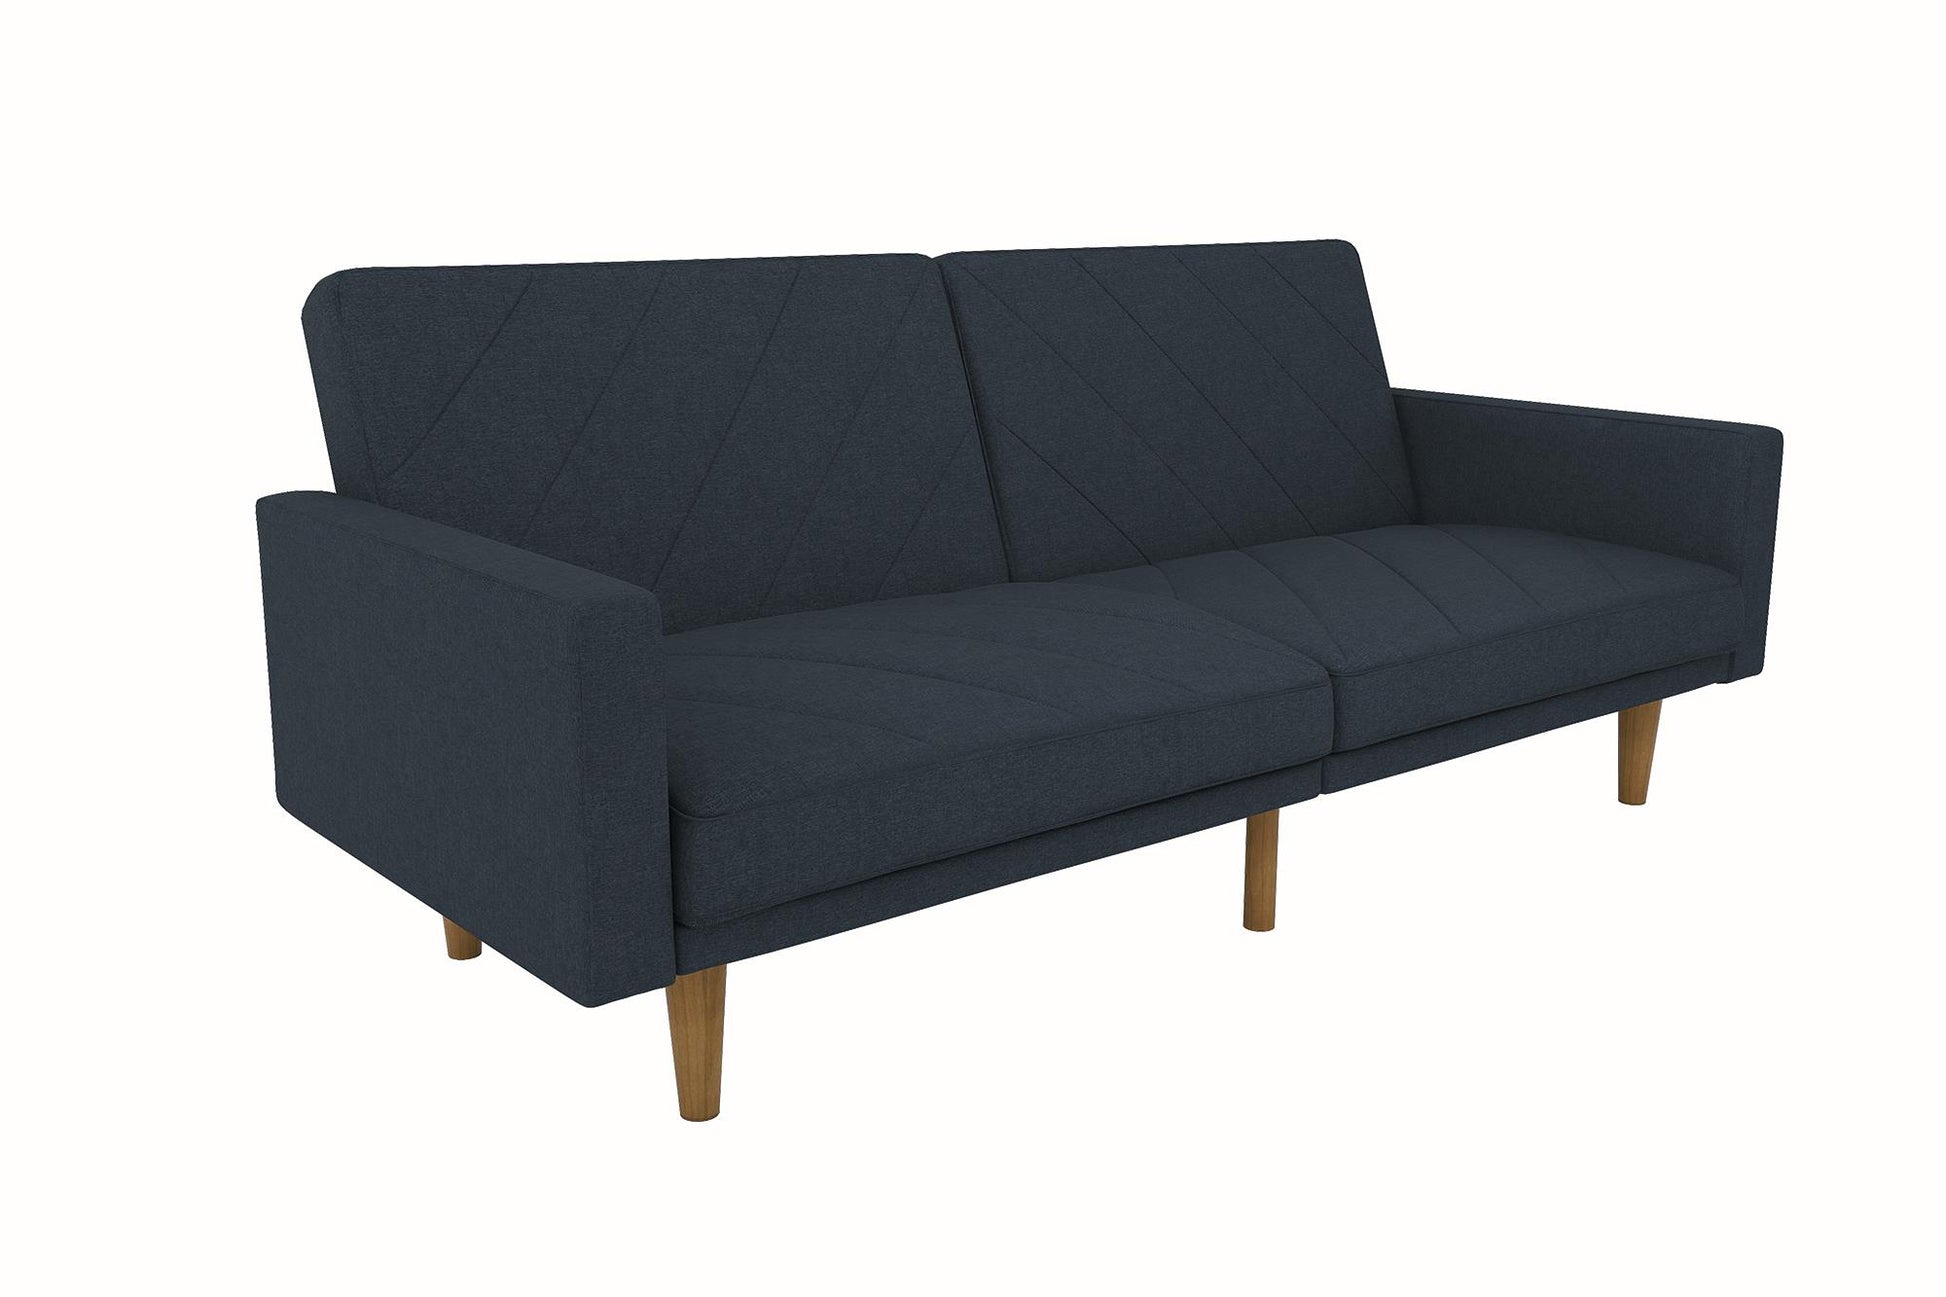 Paxson Futon with Solid Wood Legs and Diagonal Design - Navy